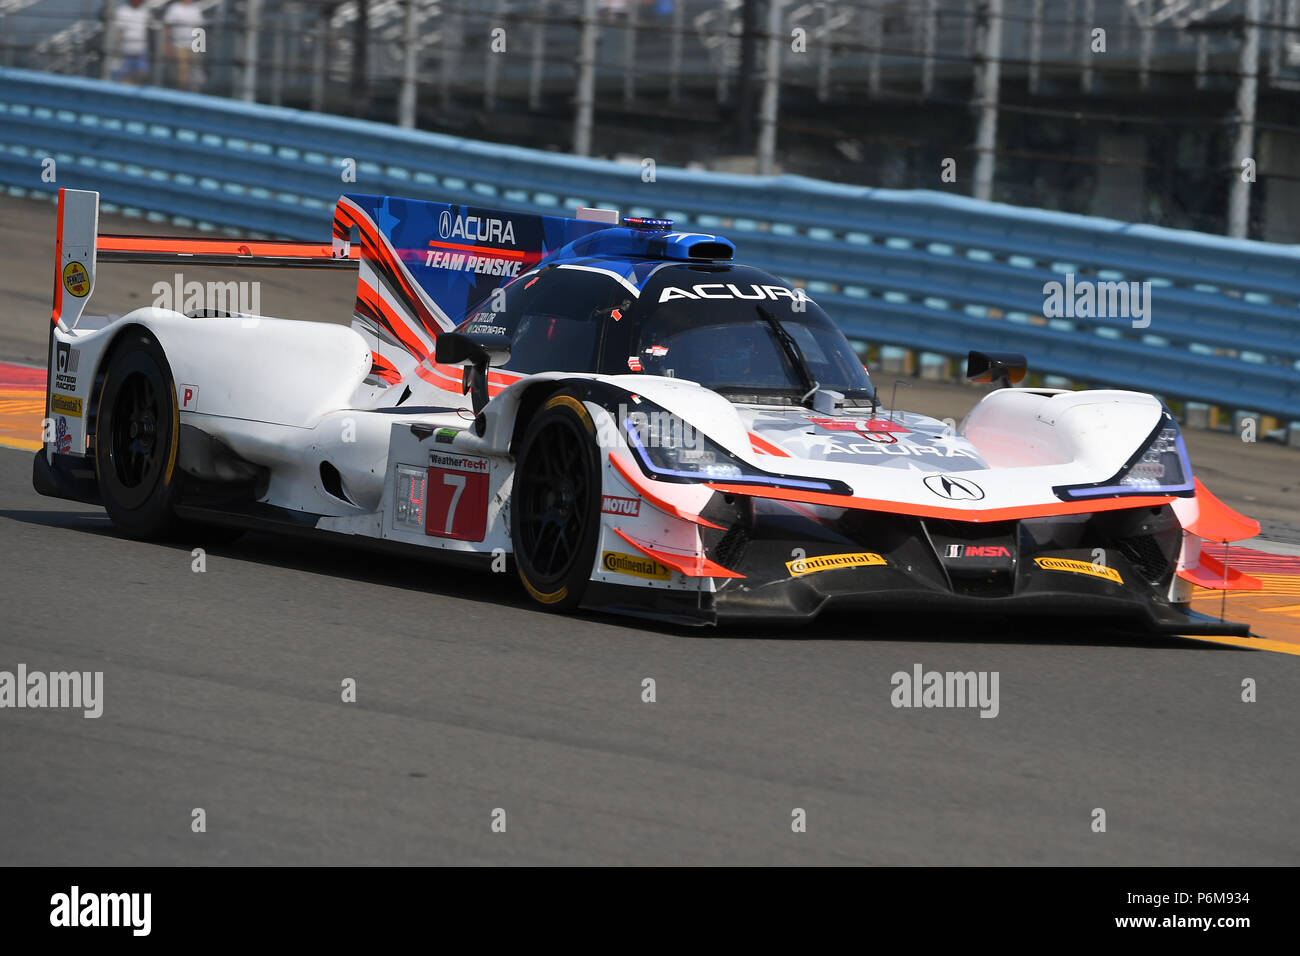 Watkins Glen New York Usa 1st July 2018 The 7 Acura Team Penske Acura Dpi Driven By Helio Castroneves Of Brazil And Ricky Taylor Of The United States During The Imsa Weathertech